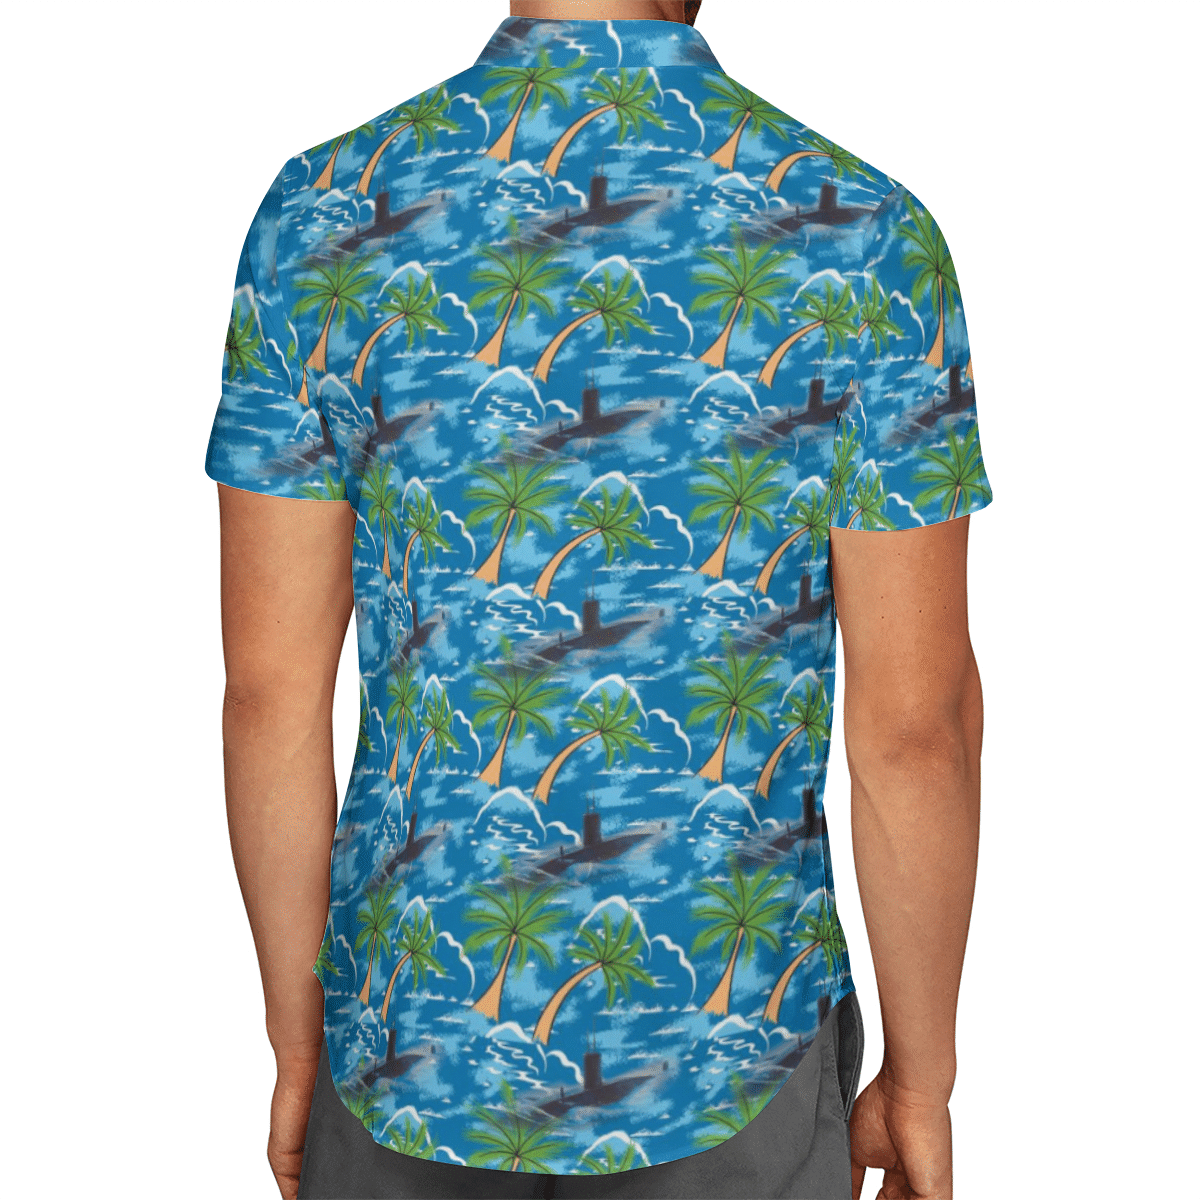 Going to the beach with a quality shirt 200